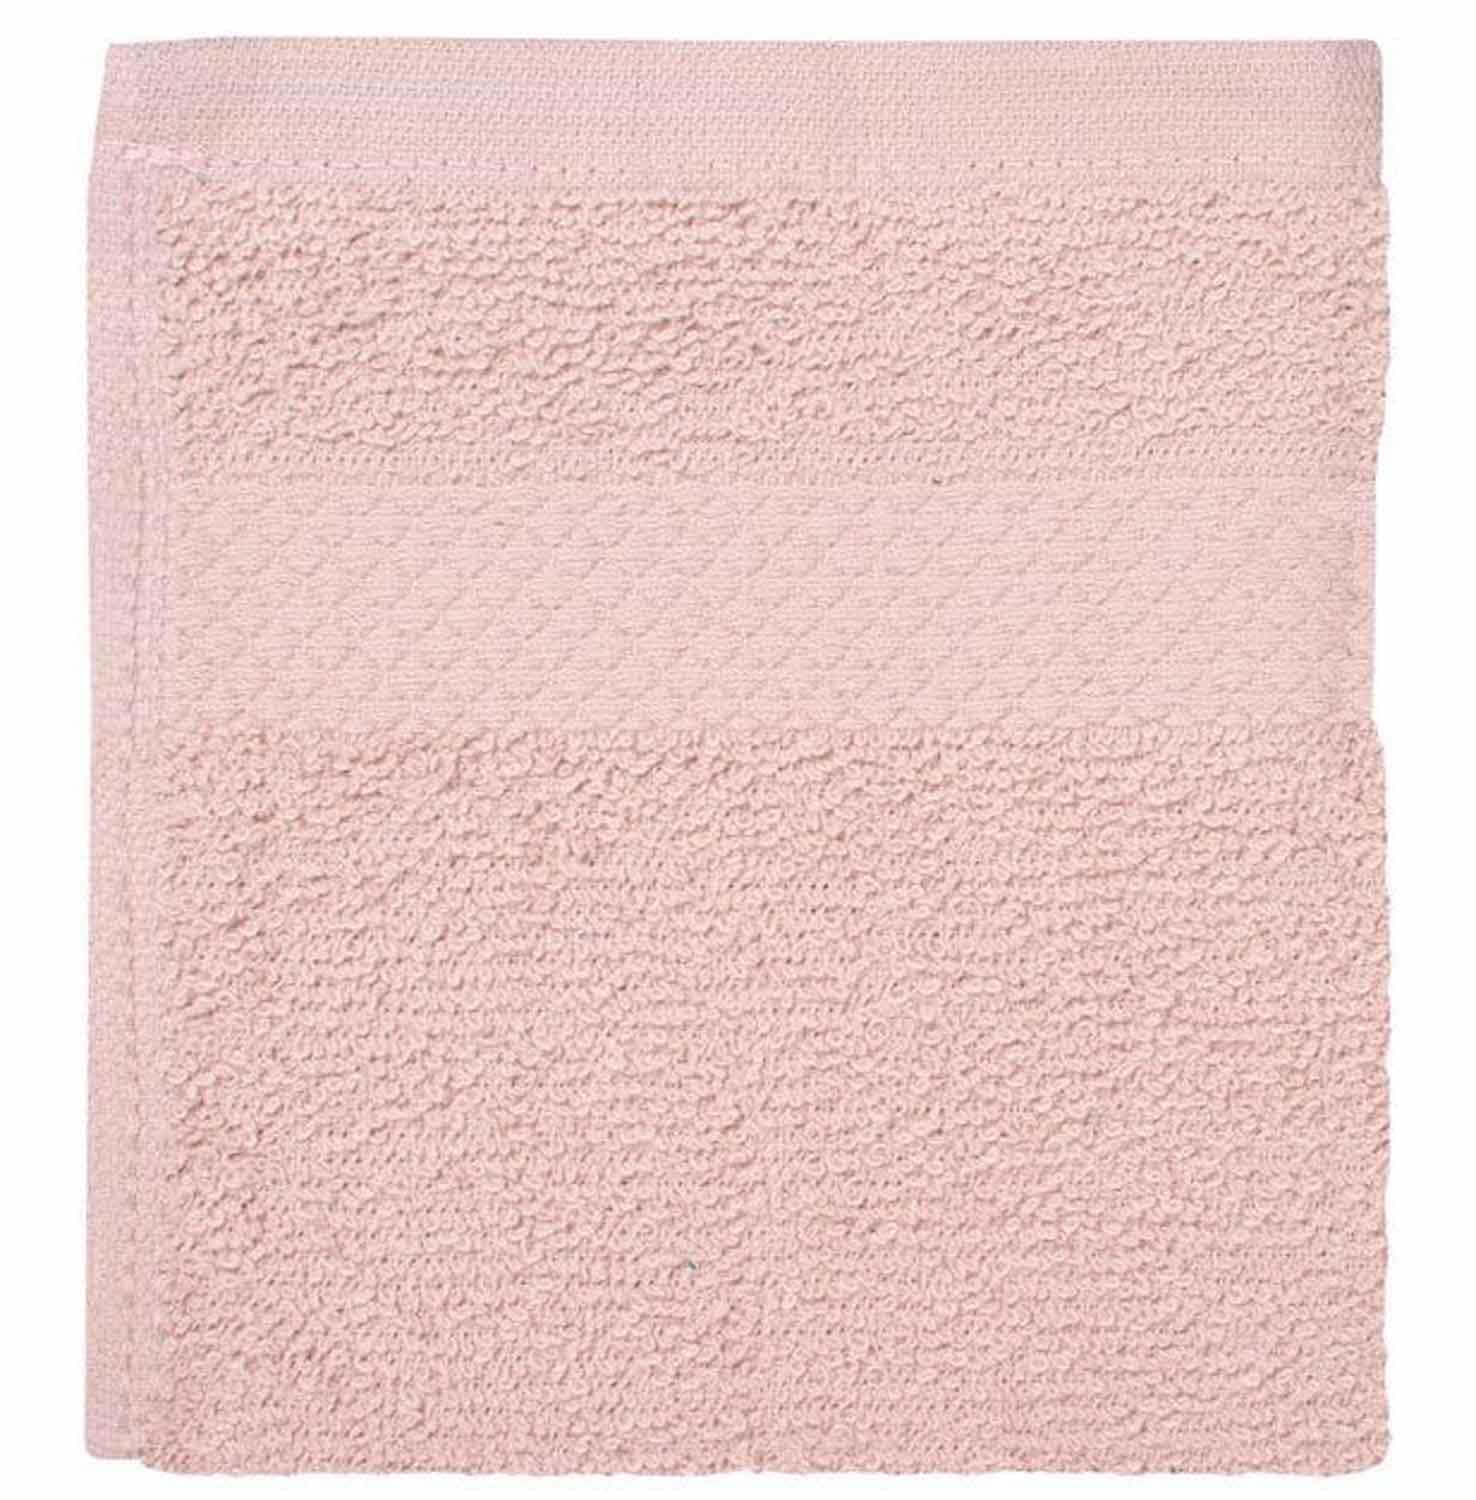 American Dawn | 12X12 Inch Rose With Single Cam Healthcare Towel | Wash Cloth